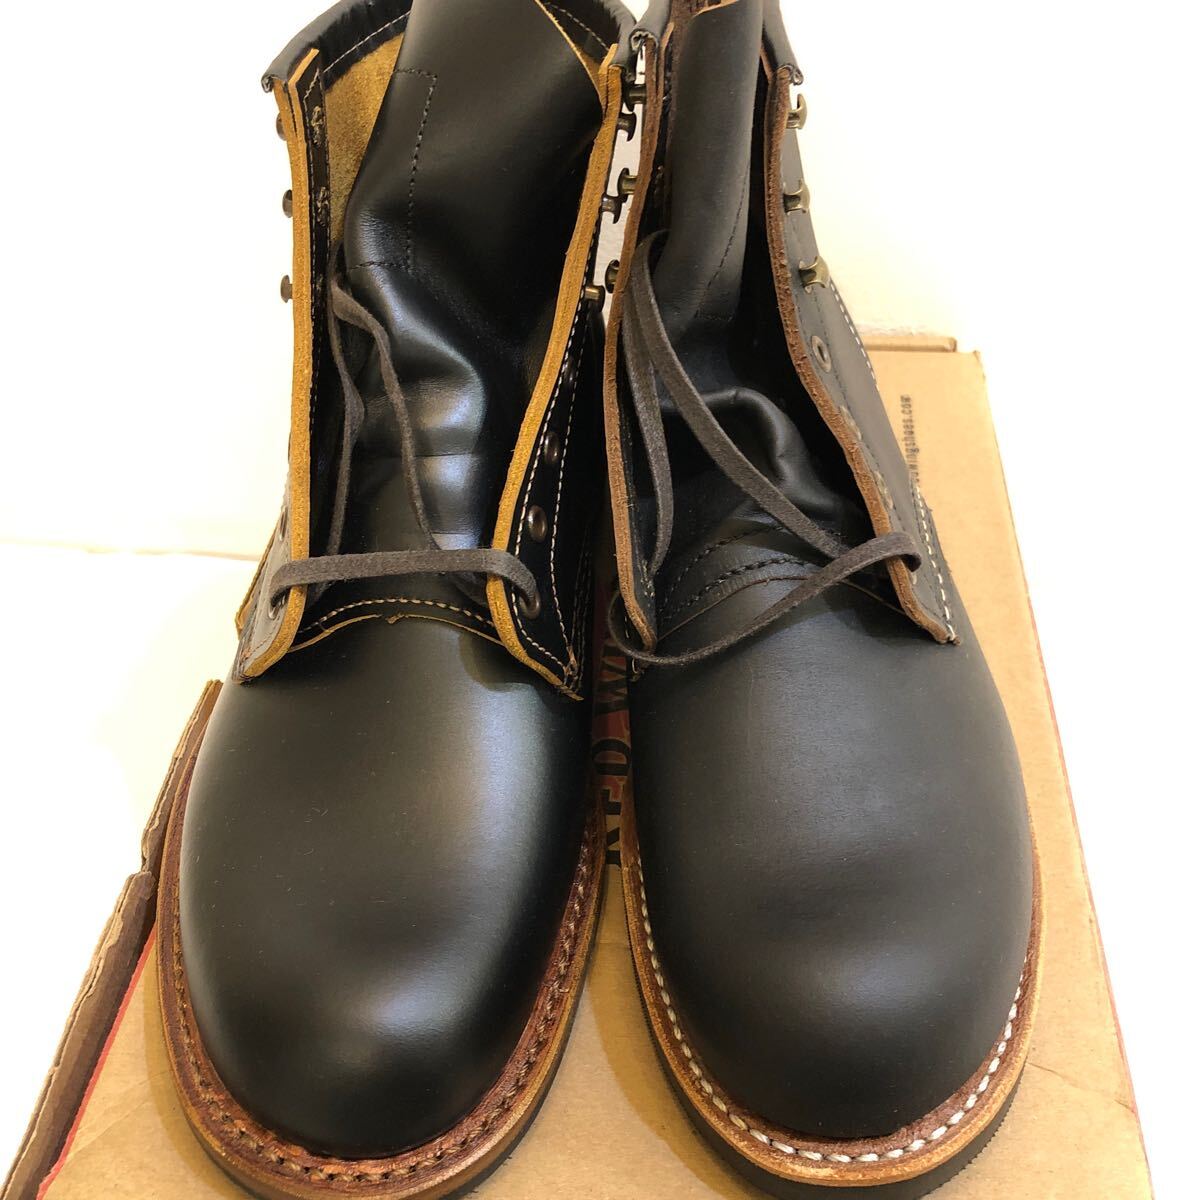  unused goods with defect REDWING Red Wing Irish setter boots black 26.5cm USA made leather shoes men's USA8.5